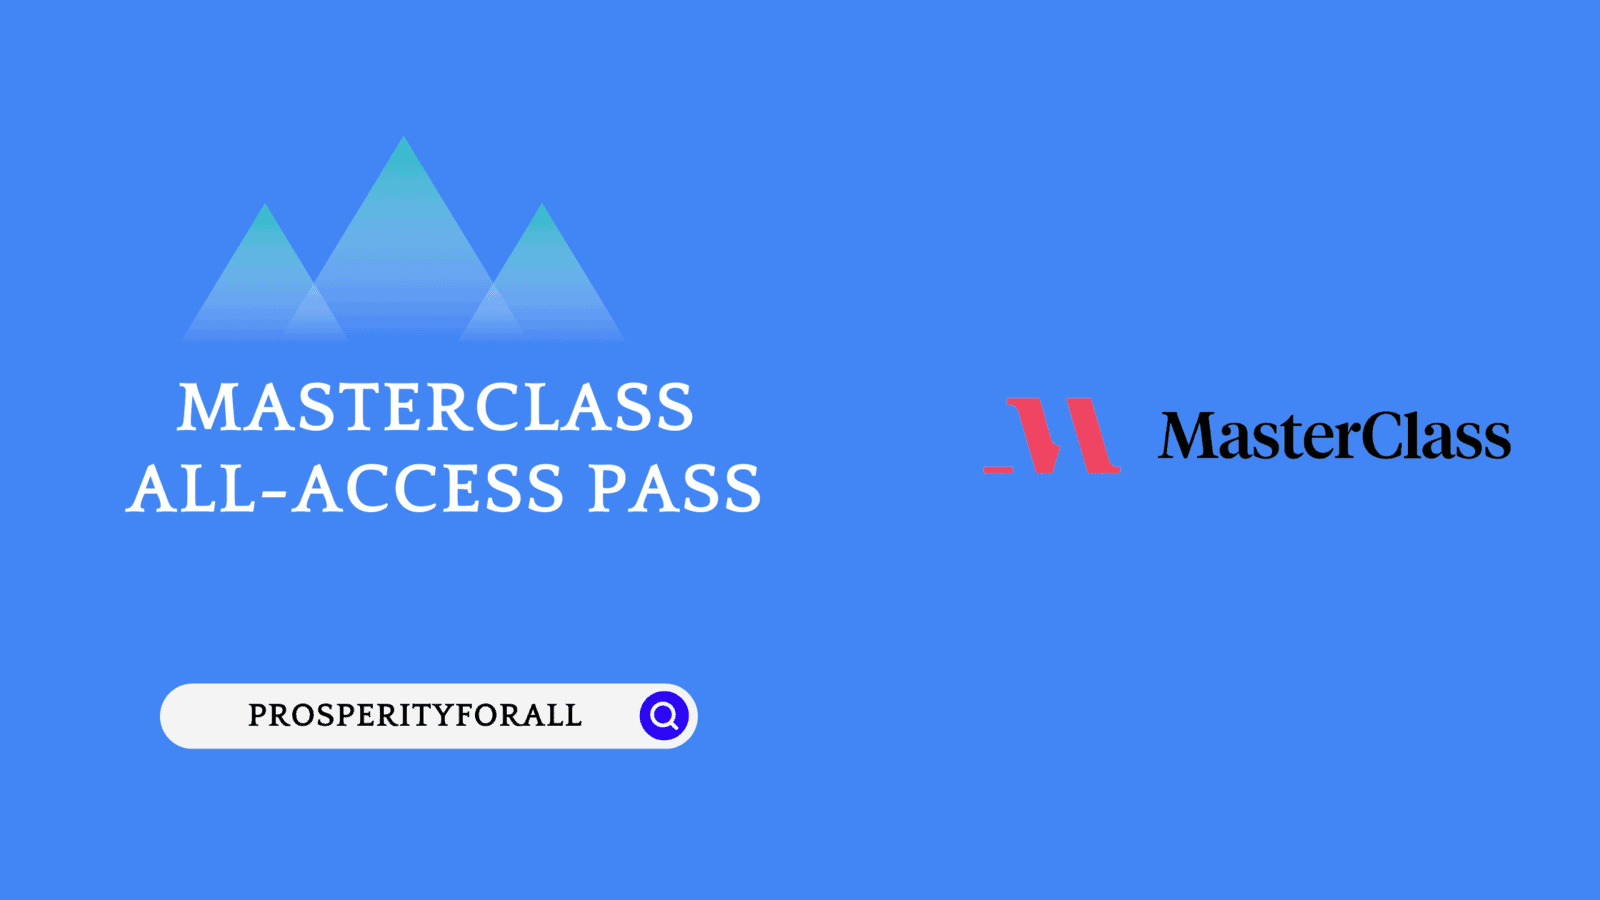 MasterClass All Access Pass: Is It Available?